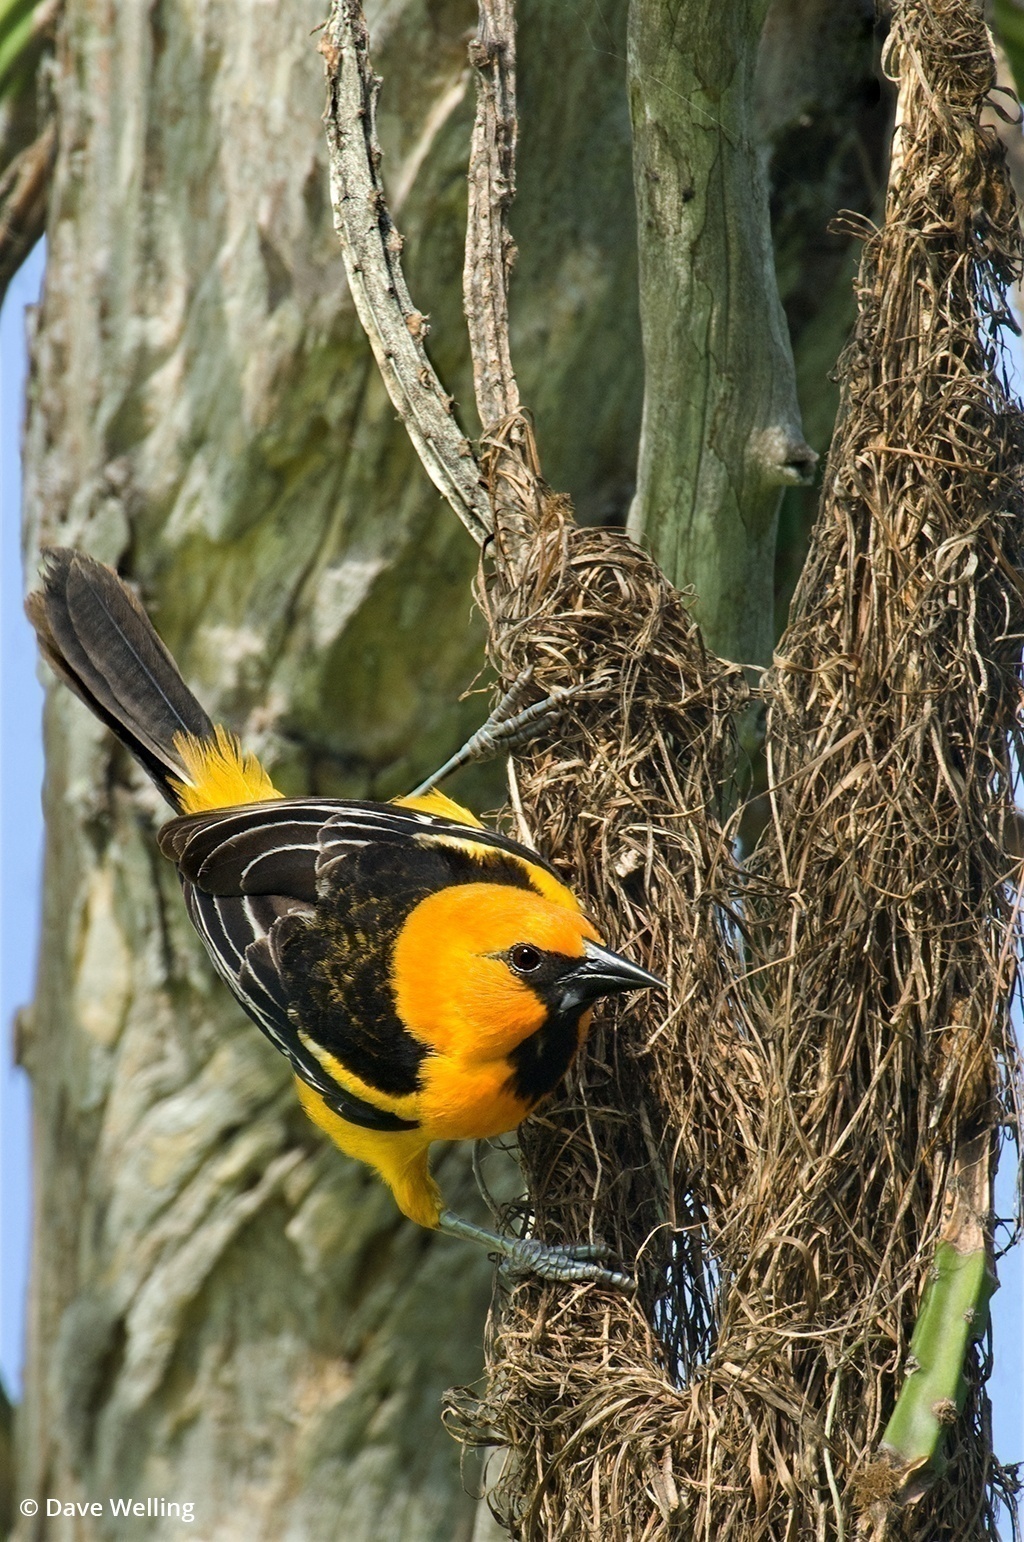 Image of a altamira oriole on a nest.